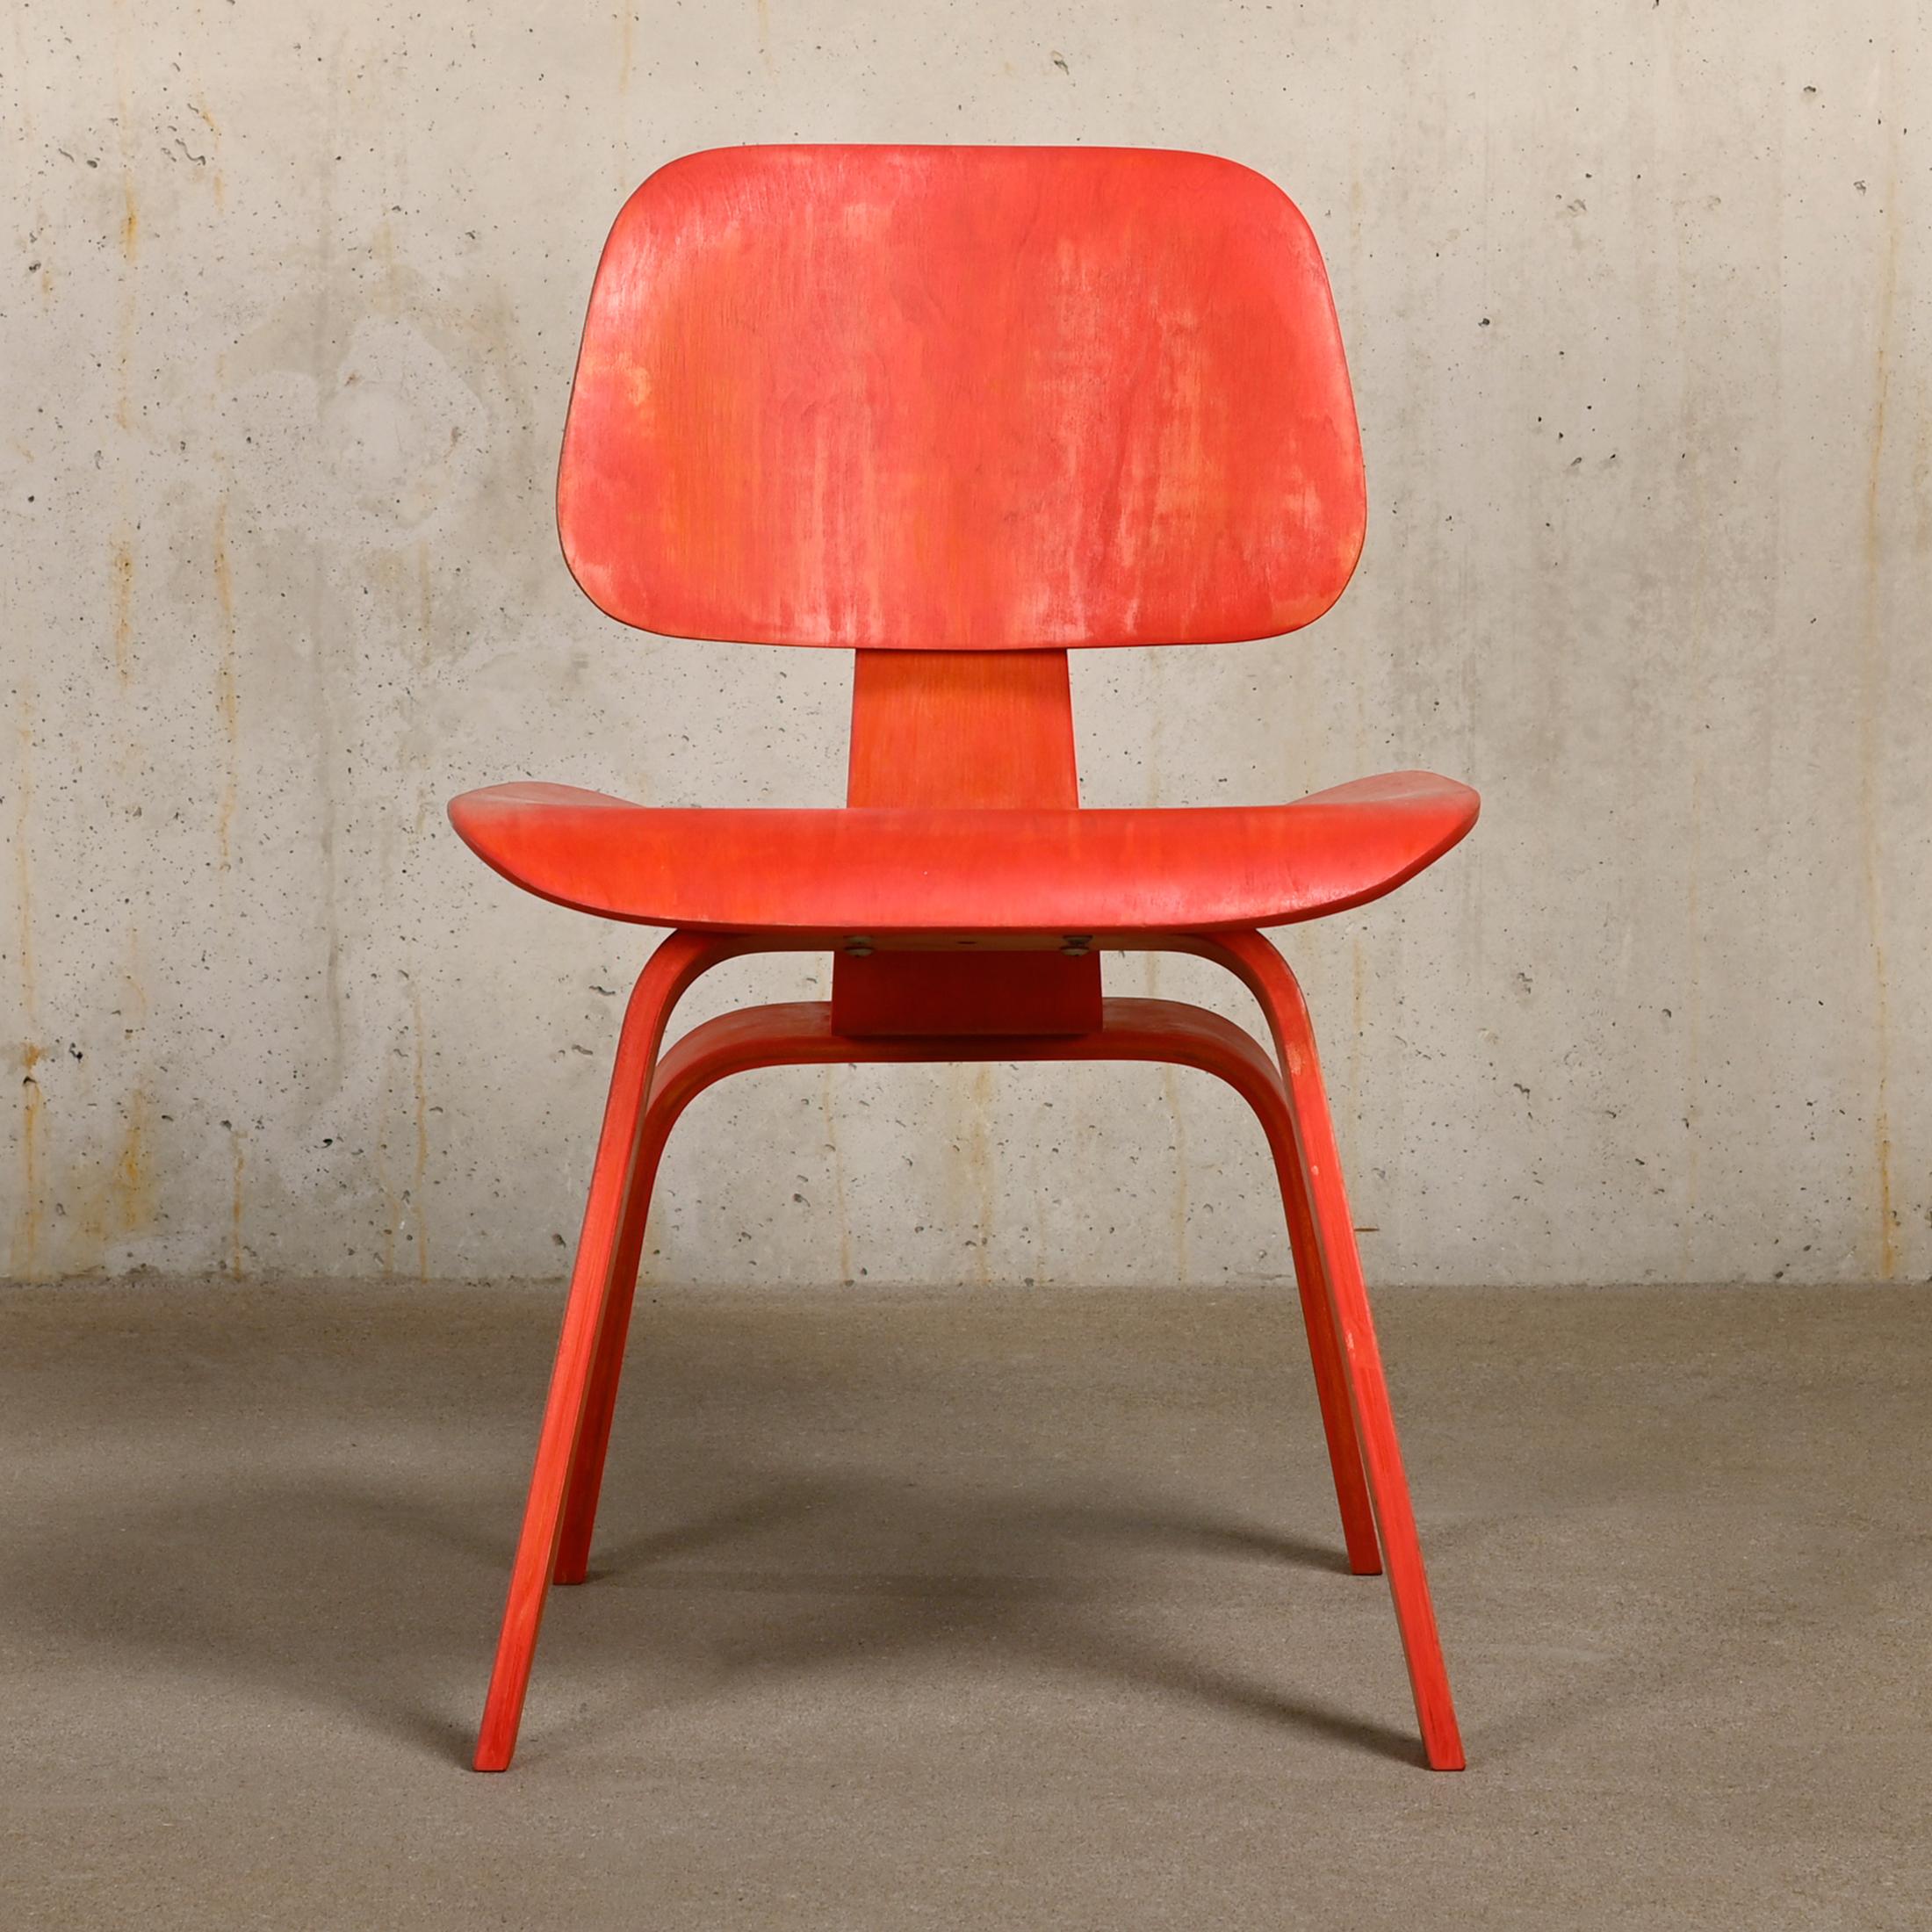 Iconic and early DCW dining chair designed by Charles & Ray Eames and manufacture by Evans Products Company, Molded Plywood division and distributed by Herman Miller late 40ties. Red aniline dye Ash plywood in good condition and recently partially